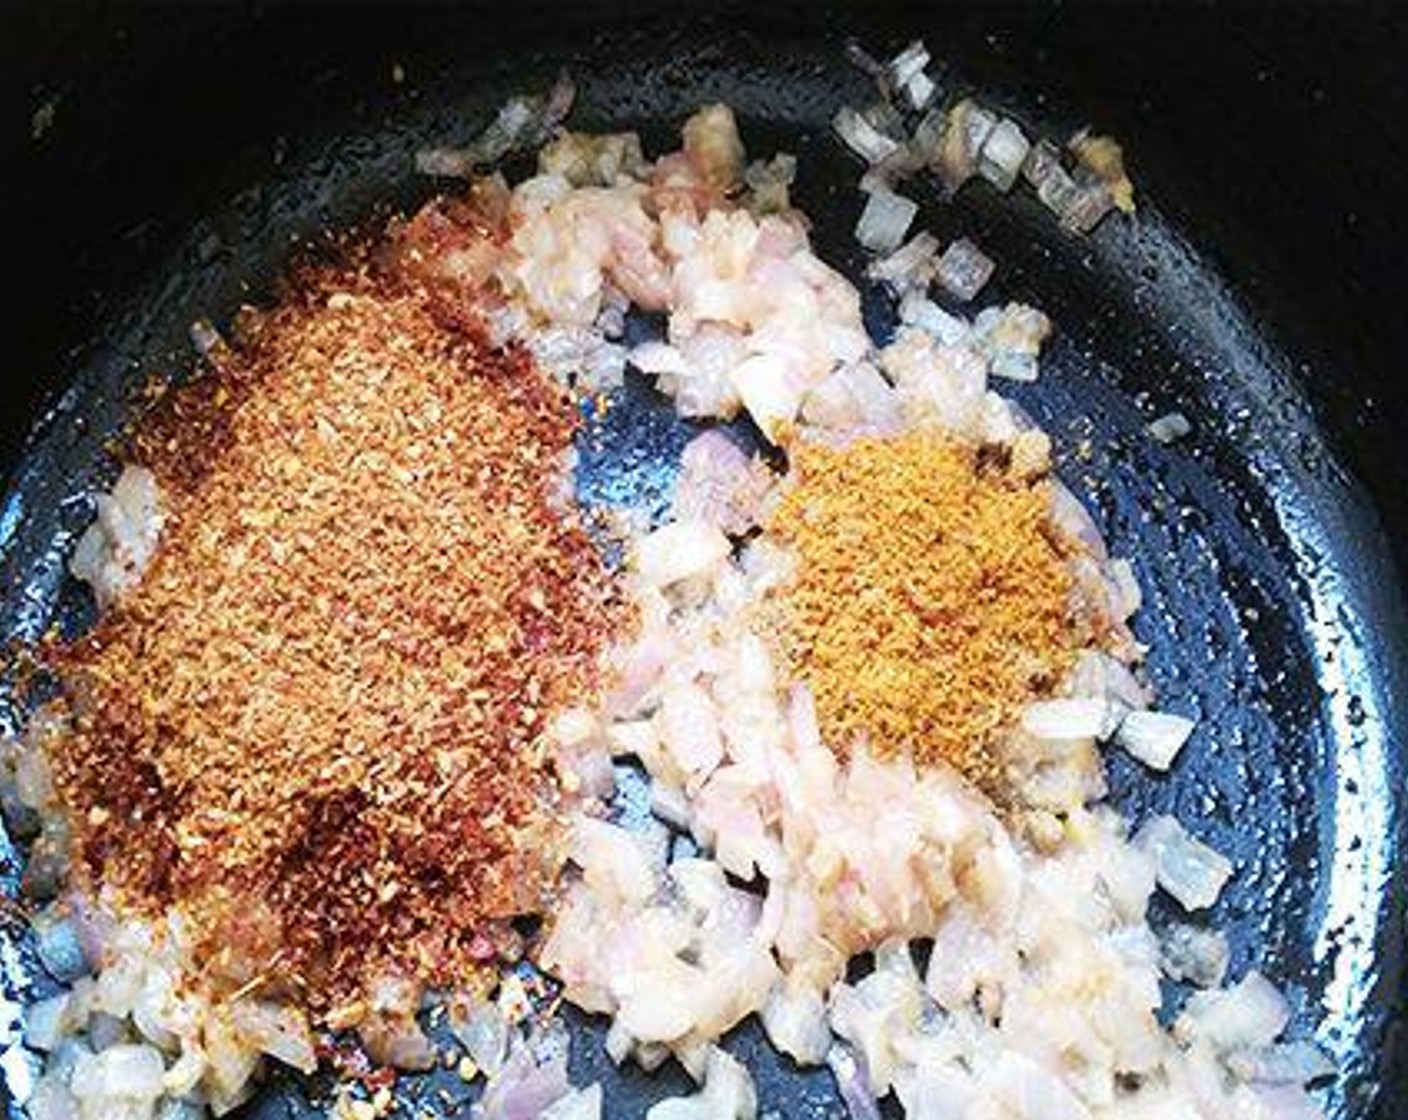 step 2 To a kadai pour Oil (1 Tbsp) and add Ginger Garlic Paste (1 tsp). Saute for three to four minutes and add finely chopped onion. Saute until it starts to change color. Now add the masala powder we made and Garam Masala (1/2 tsp). Saute until the raw smell of the masala is gone.